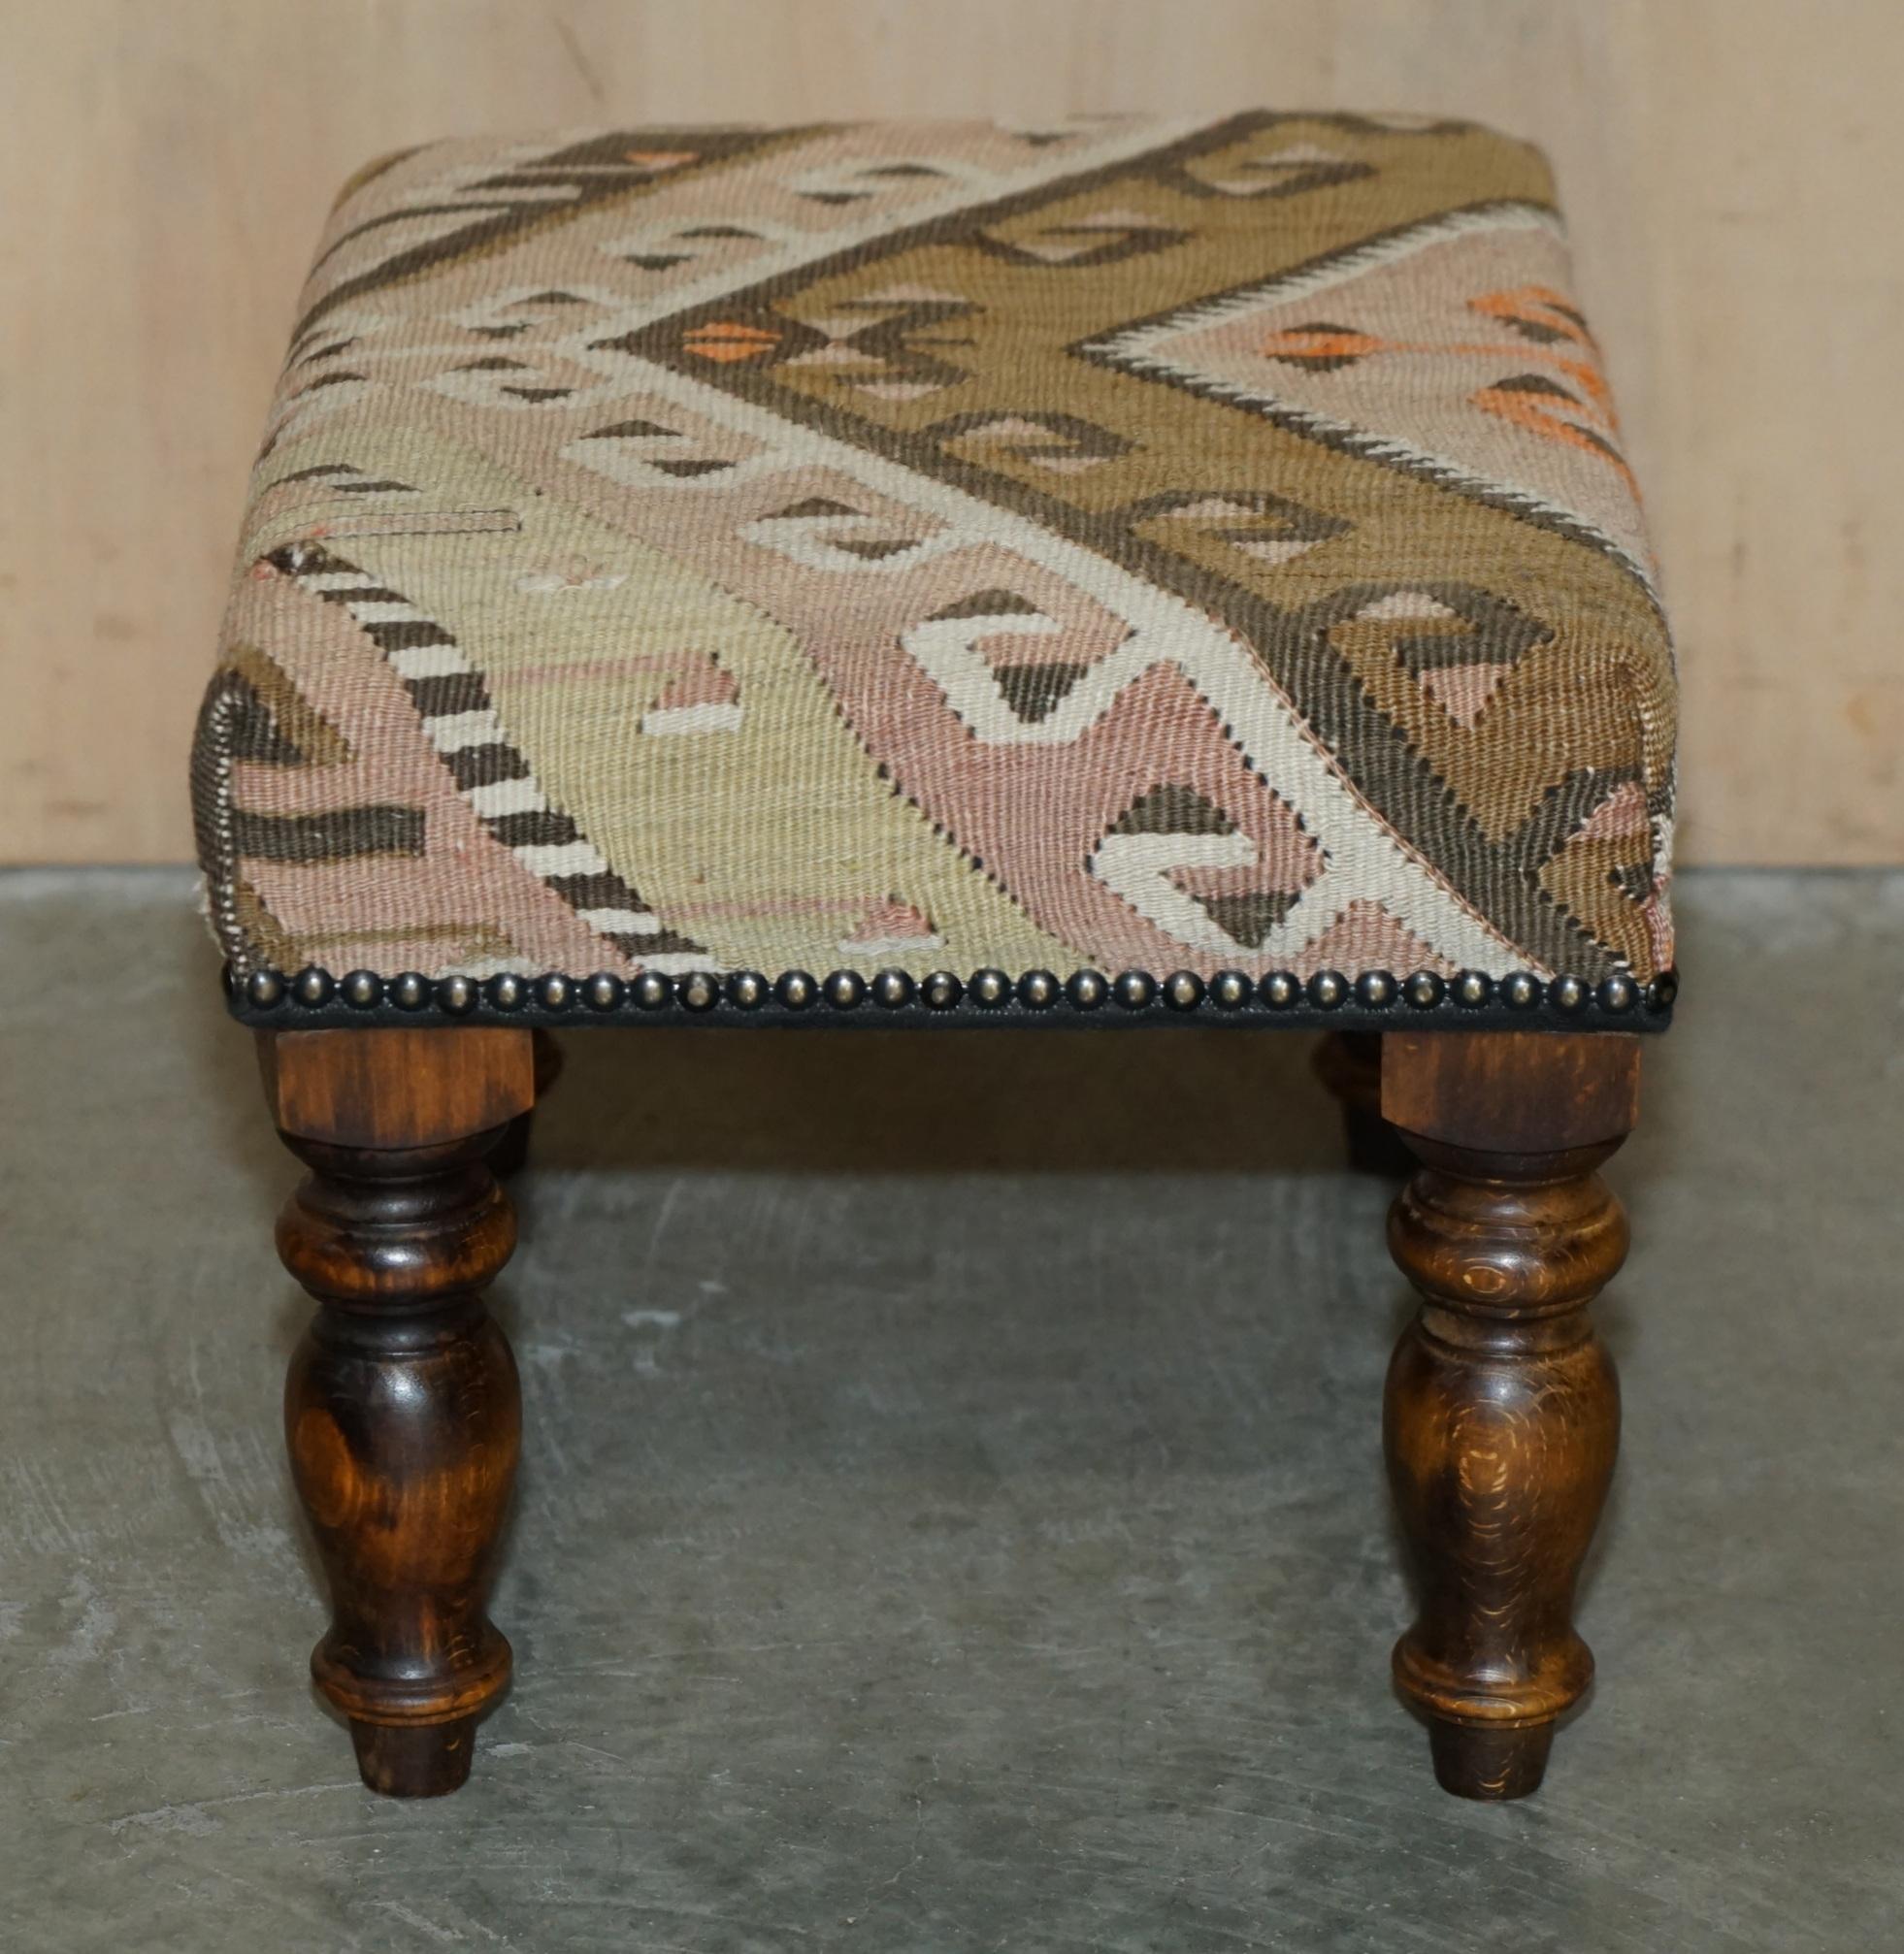 Upholstery STUNNiNG & COLLECTABLE VINTAGE GEORGE SMITH CHELSEA KILIM FOOTSTOOL OTTOMAN For Sale